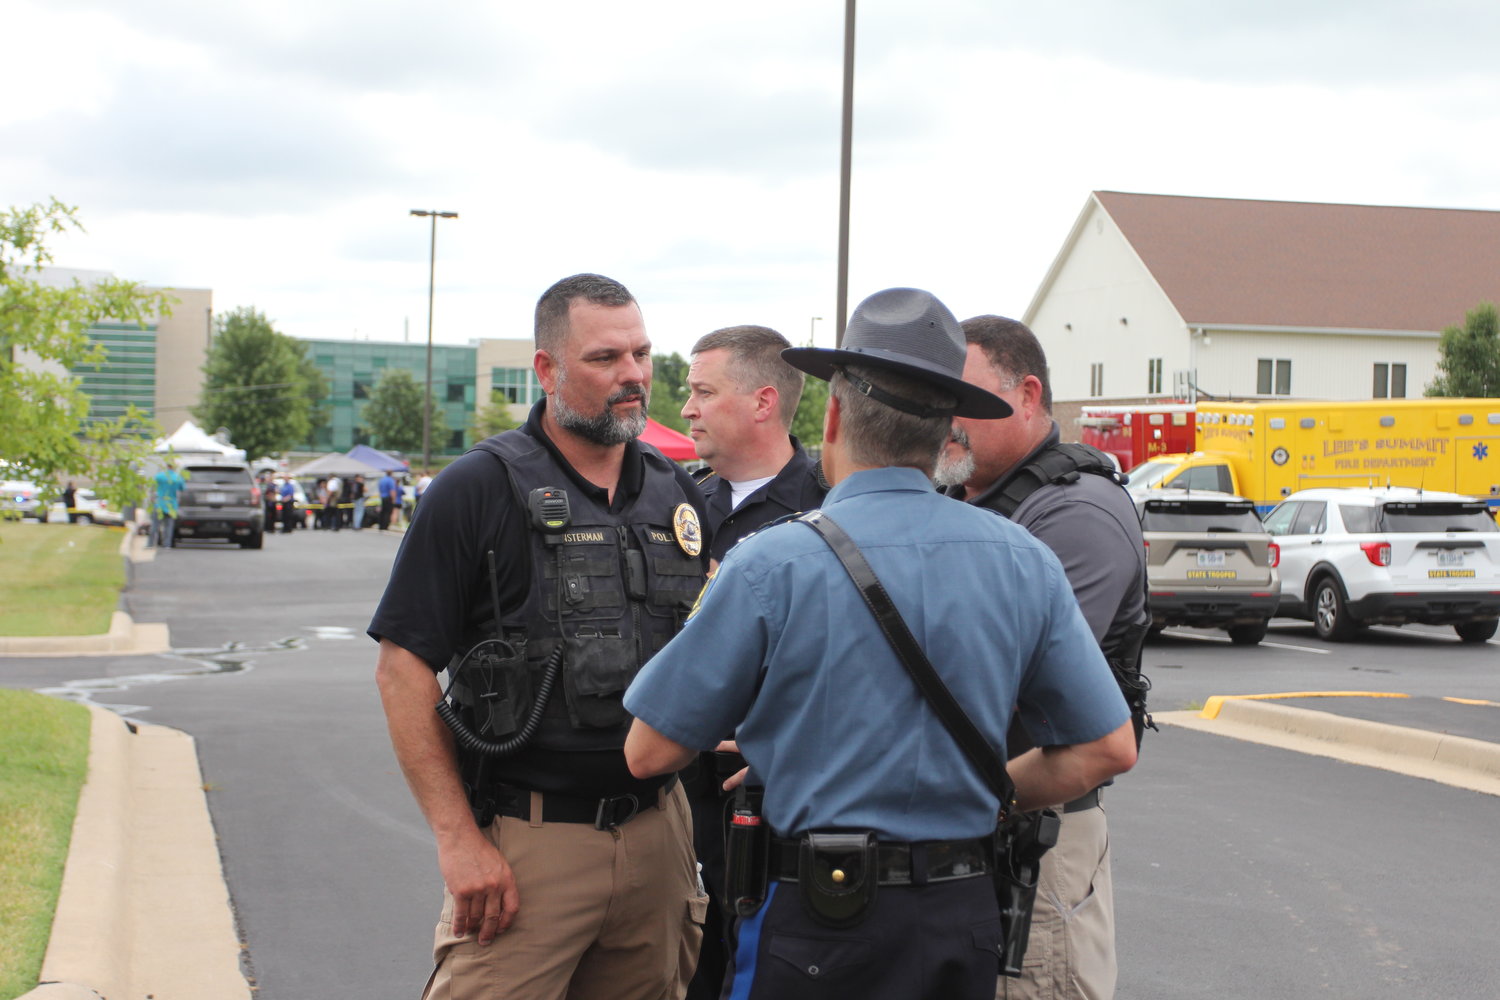 Warrensburg Police Department Interim Police Chief Andy Munsterman speaks with officers from other agencies Friday morning, July 8 after the all clear was given at what was an active scene at Western Missouri Medical Center. Responding agencies used The Park at Grover Park Baptist Church, across the street from WMMC, as a staging area.